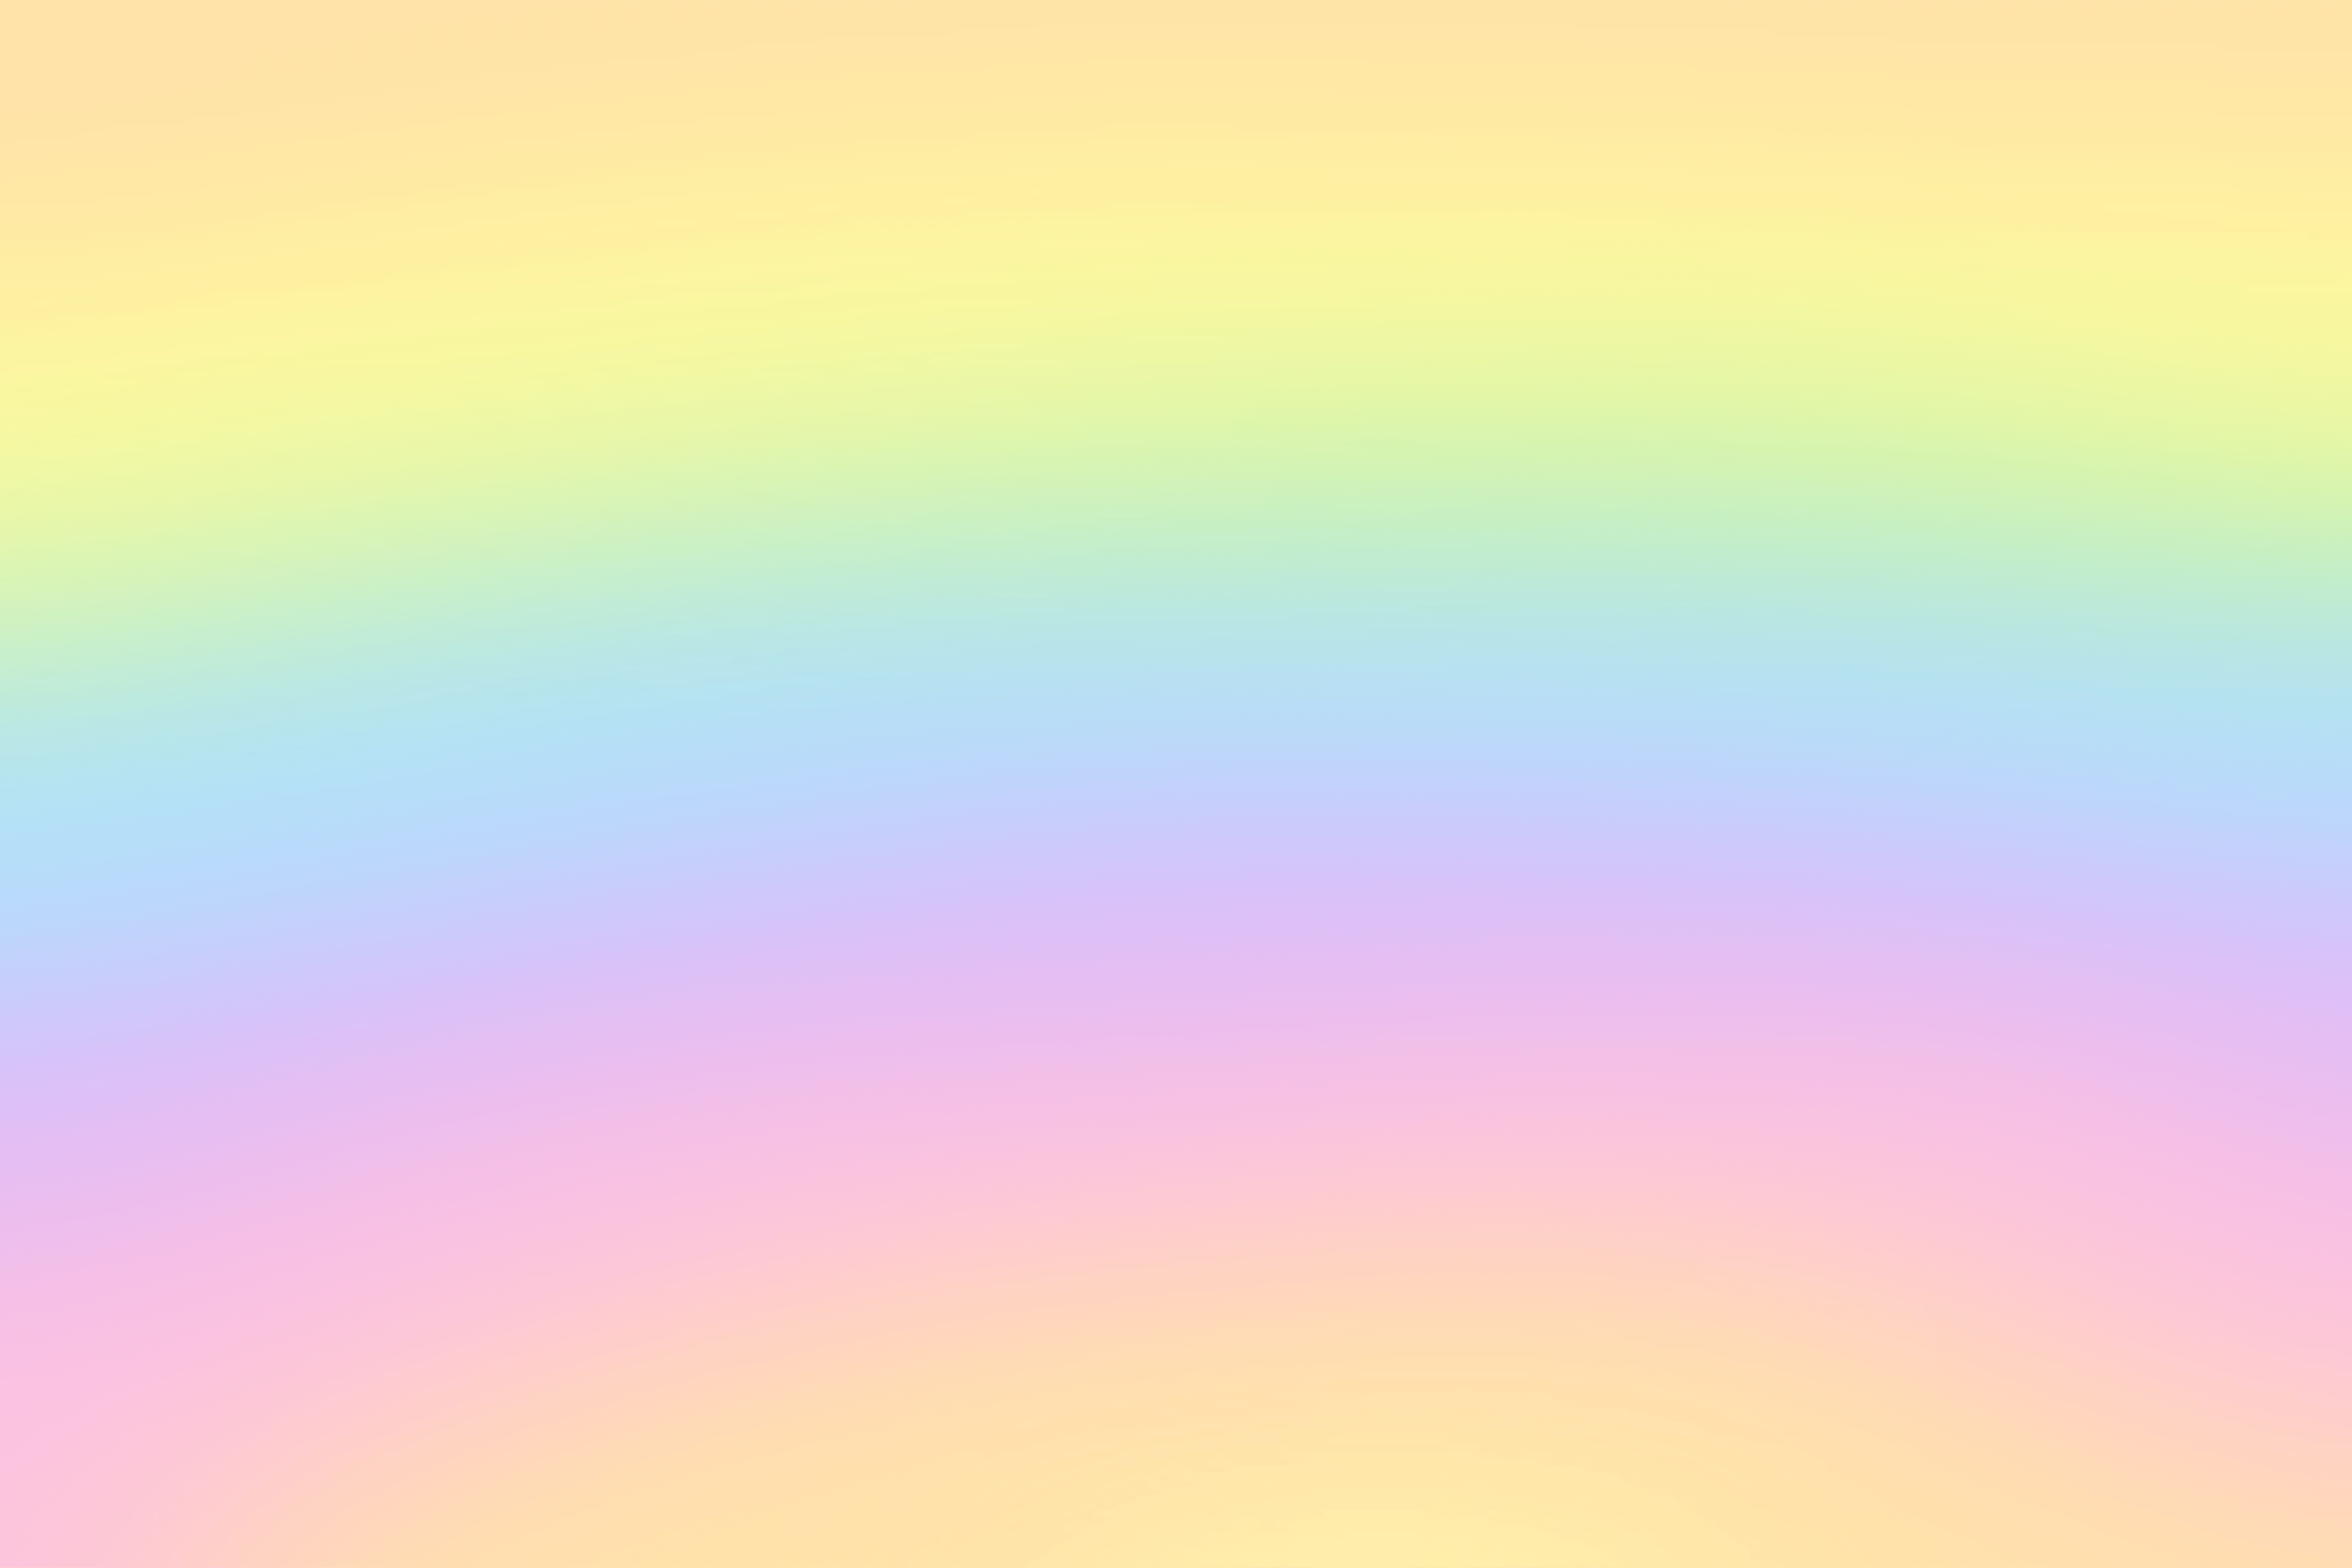 A soft, pastel gradient background with a mix of yellow, pink, blue, and purple hues. - Pastel rainbow